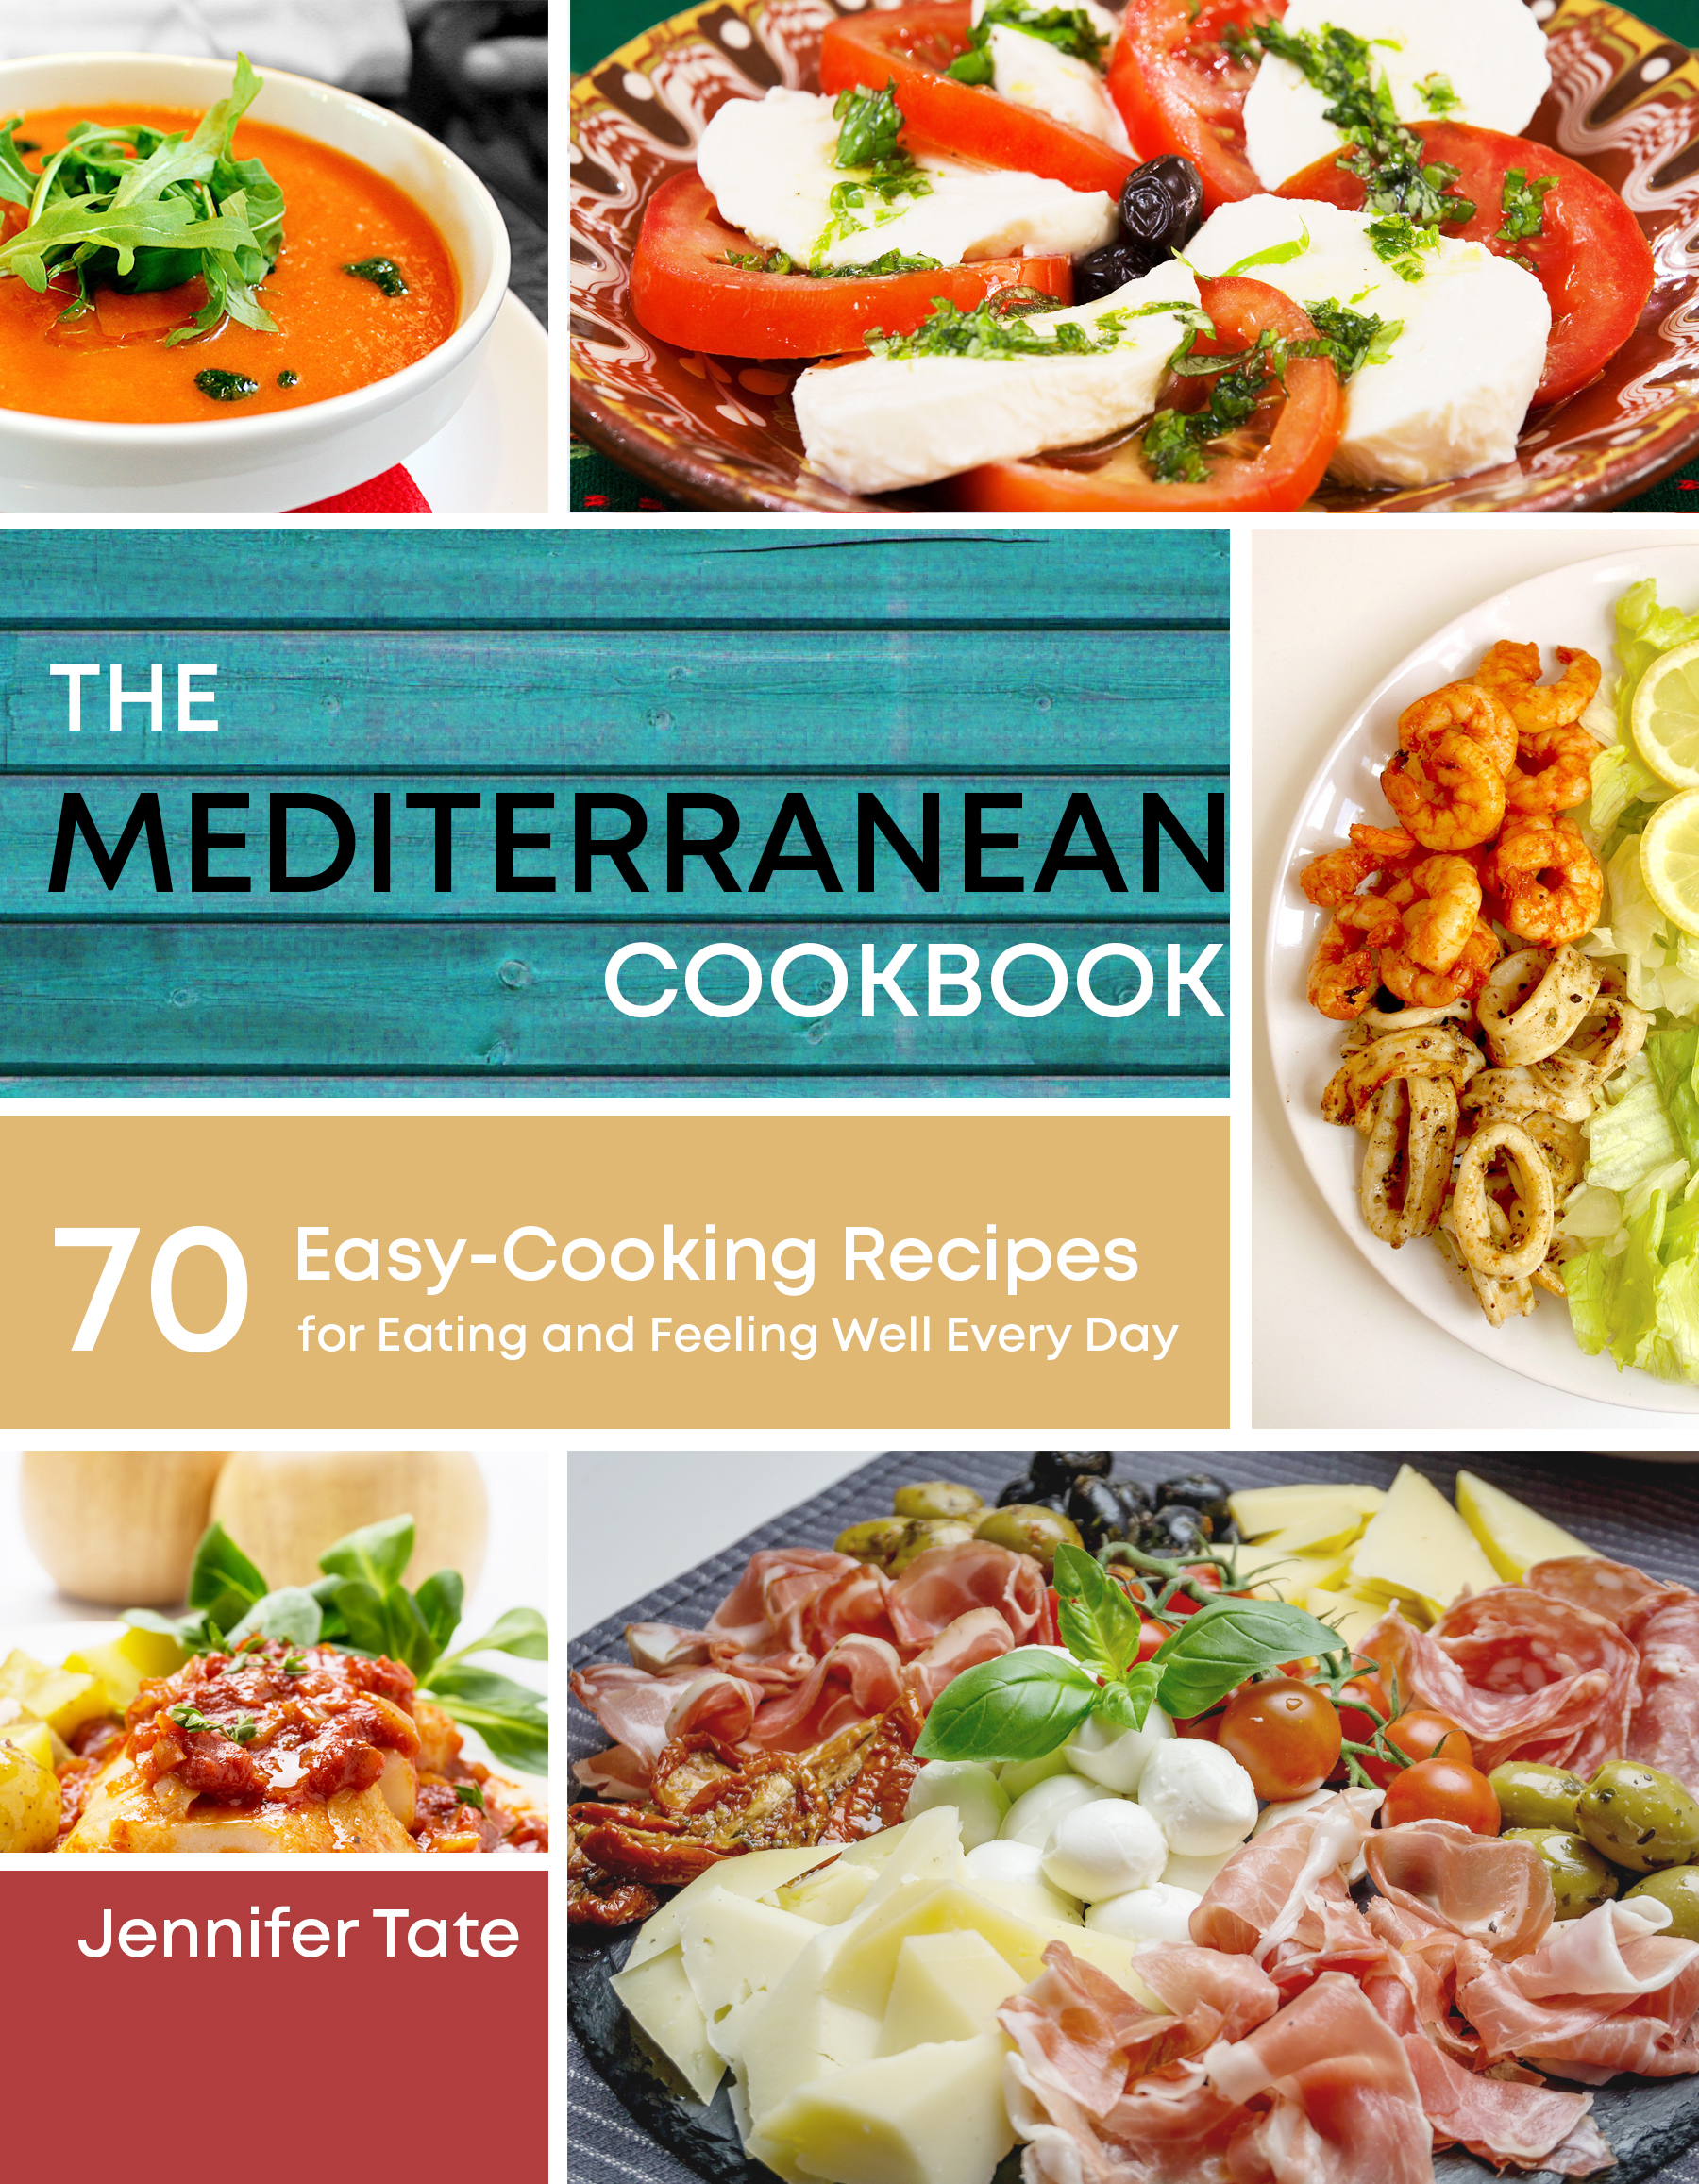 FREE: The Mediterranean Cookbook for Healthy Lifestyle: 70 Easy Recipes for Eating and Feeling Well Every Day, 7-Day Meal Plan by Jennifer Tate